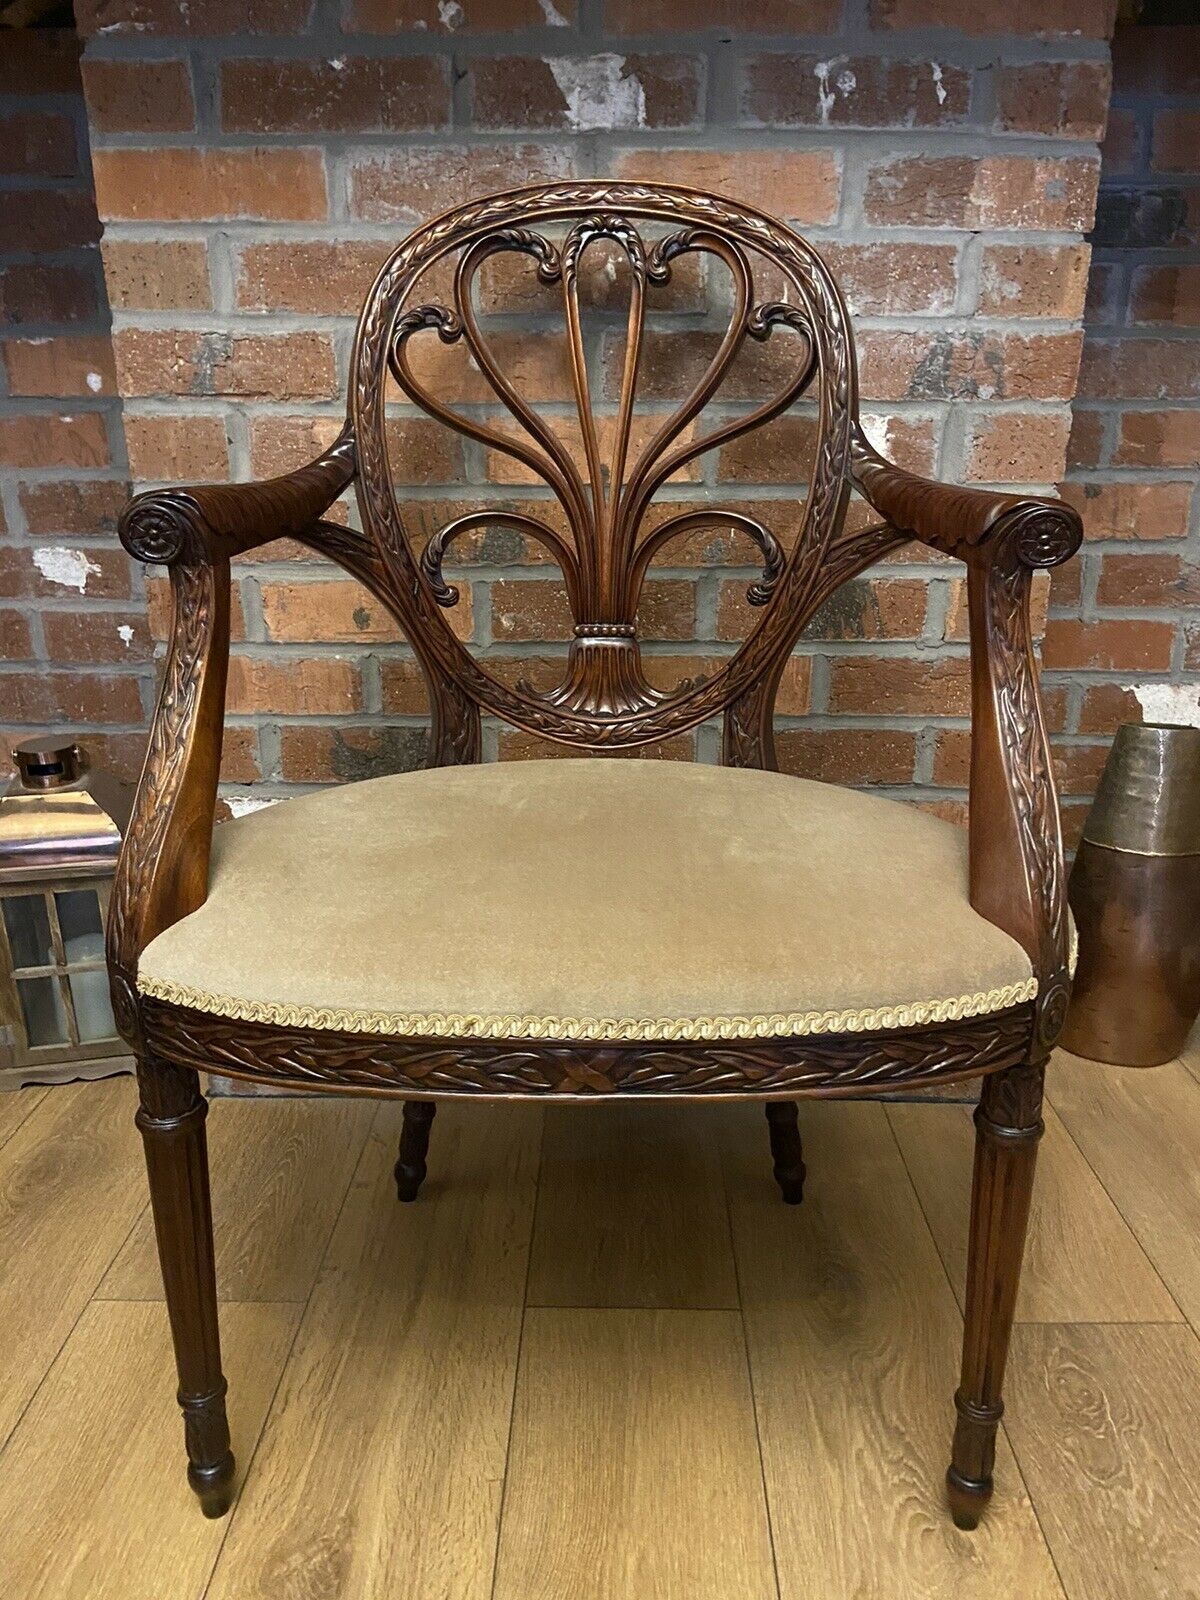 RARE HICKORY CHAIR CARVED MAHOGANY ANTHEMION SHERATON ARMCHAIR LARGE SIZE SEAT